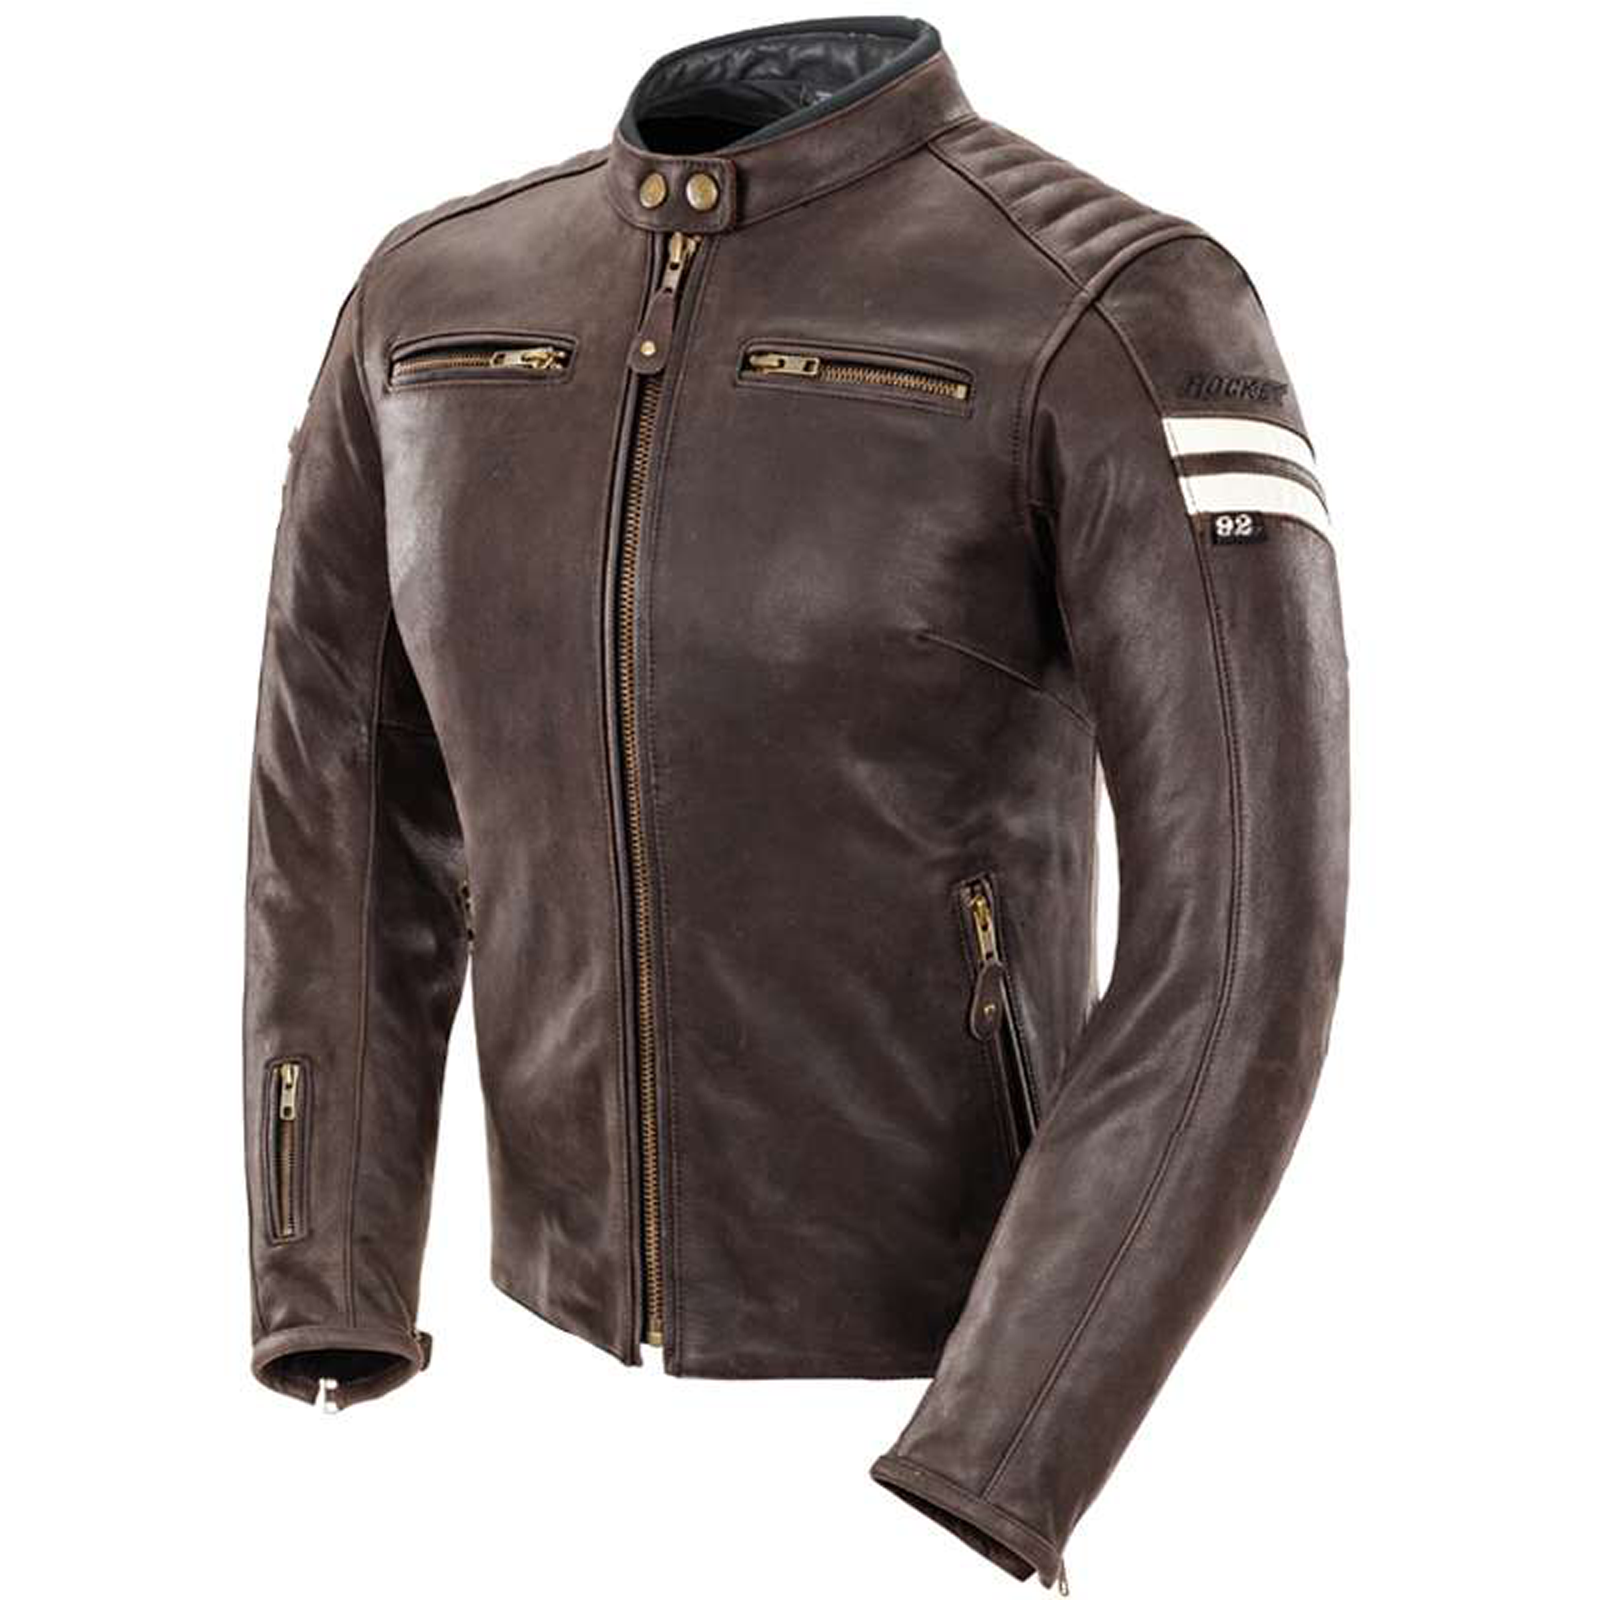 https://static.upnorthsports.com/Image/catimages/3258_Ladies_Classic_92_Leather_Jacket-1600.png